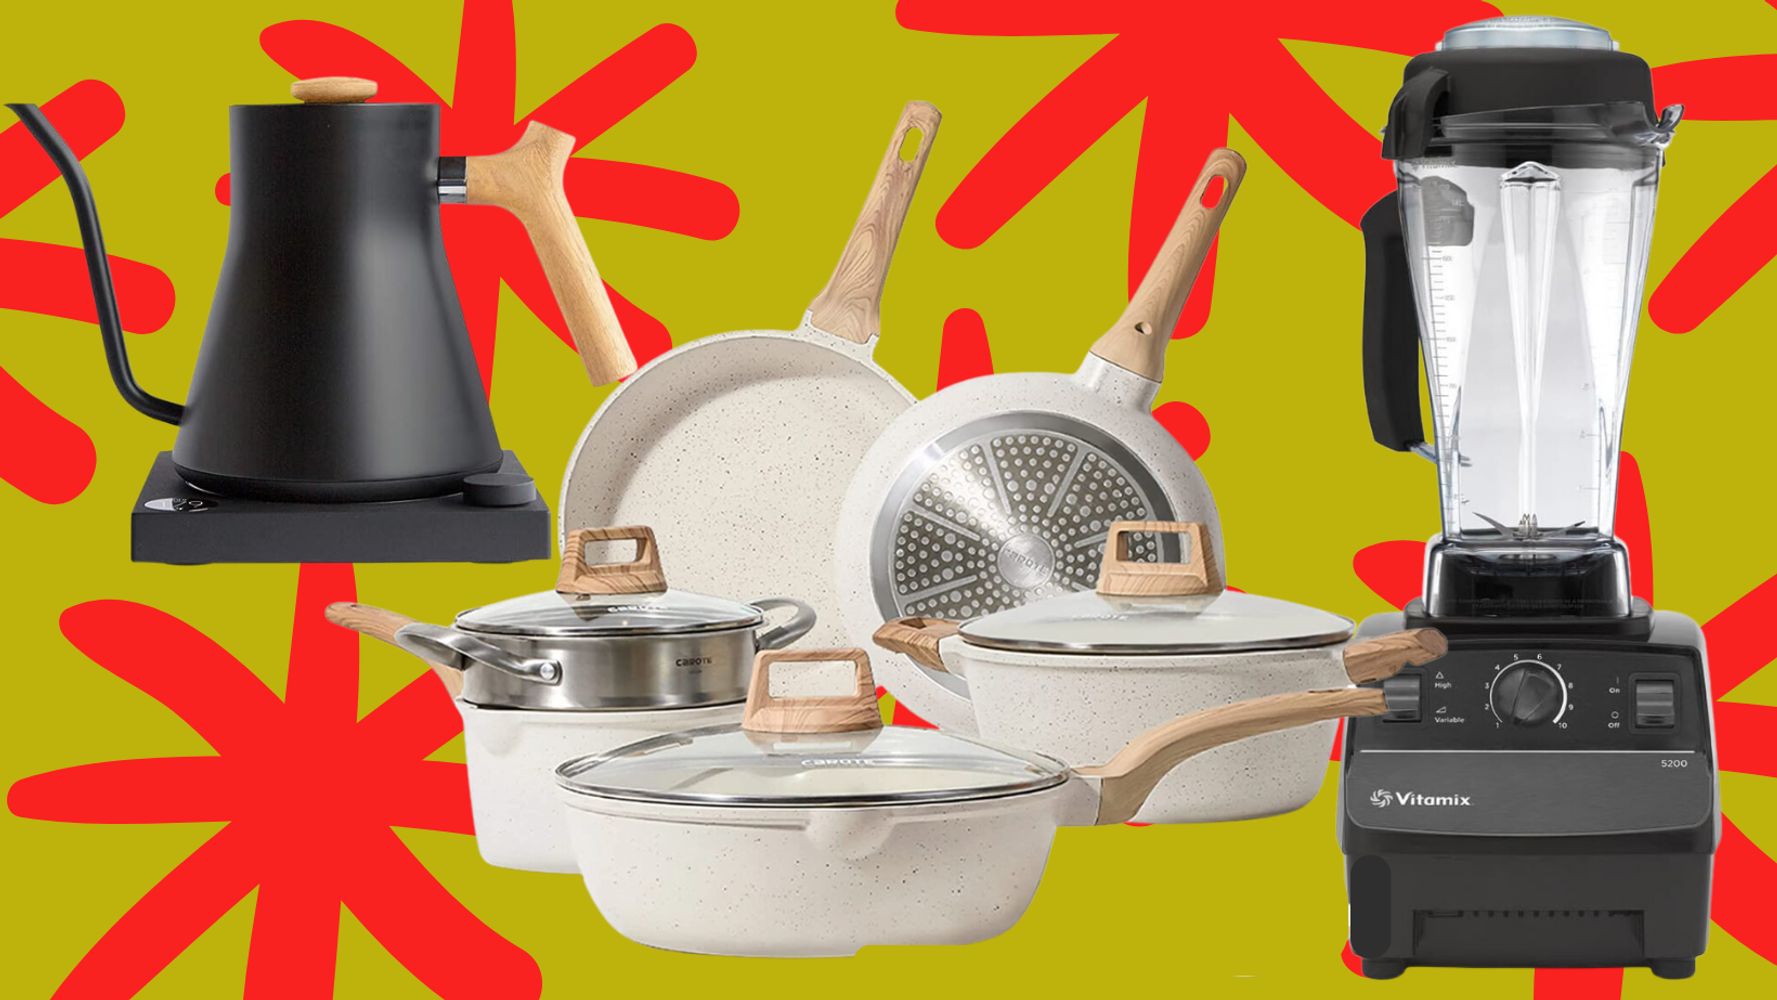 MEATER+ - Custom Cookware Products, Personalized Kitchenware